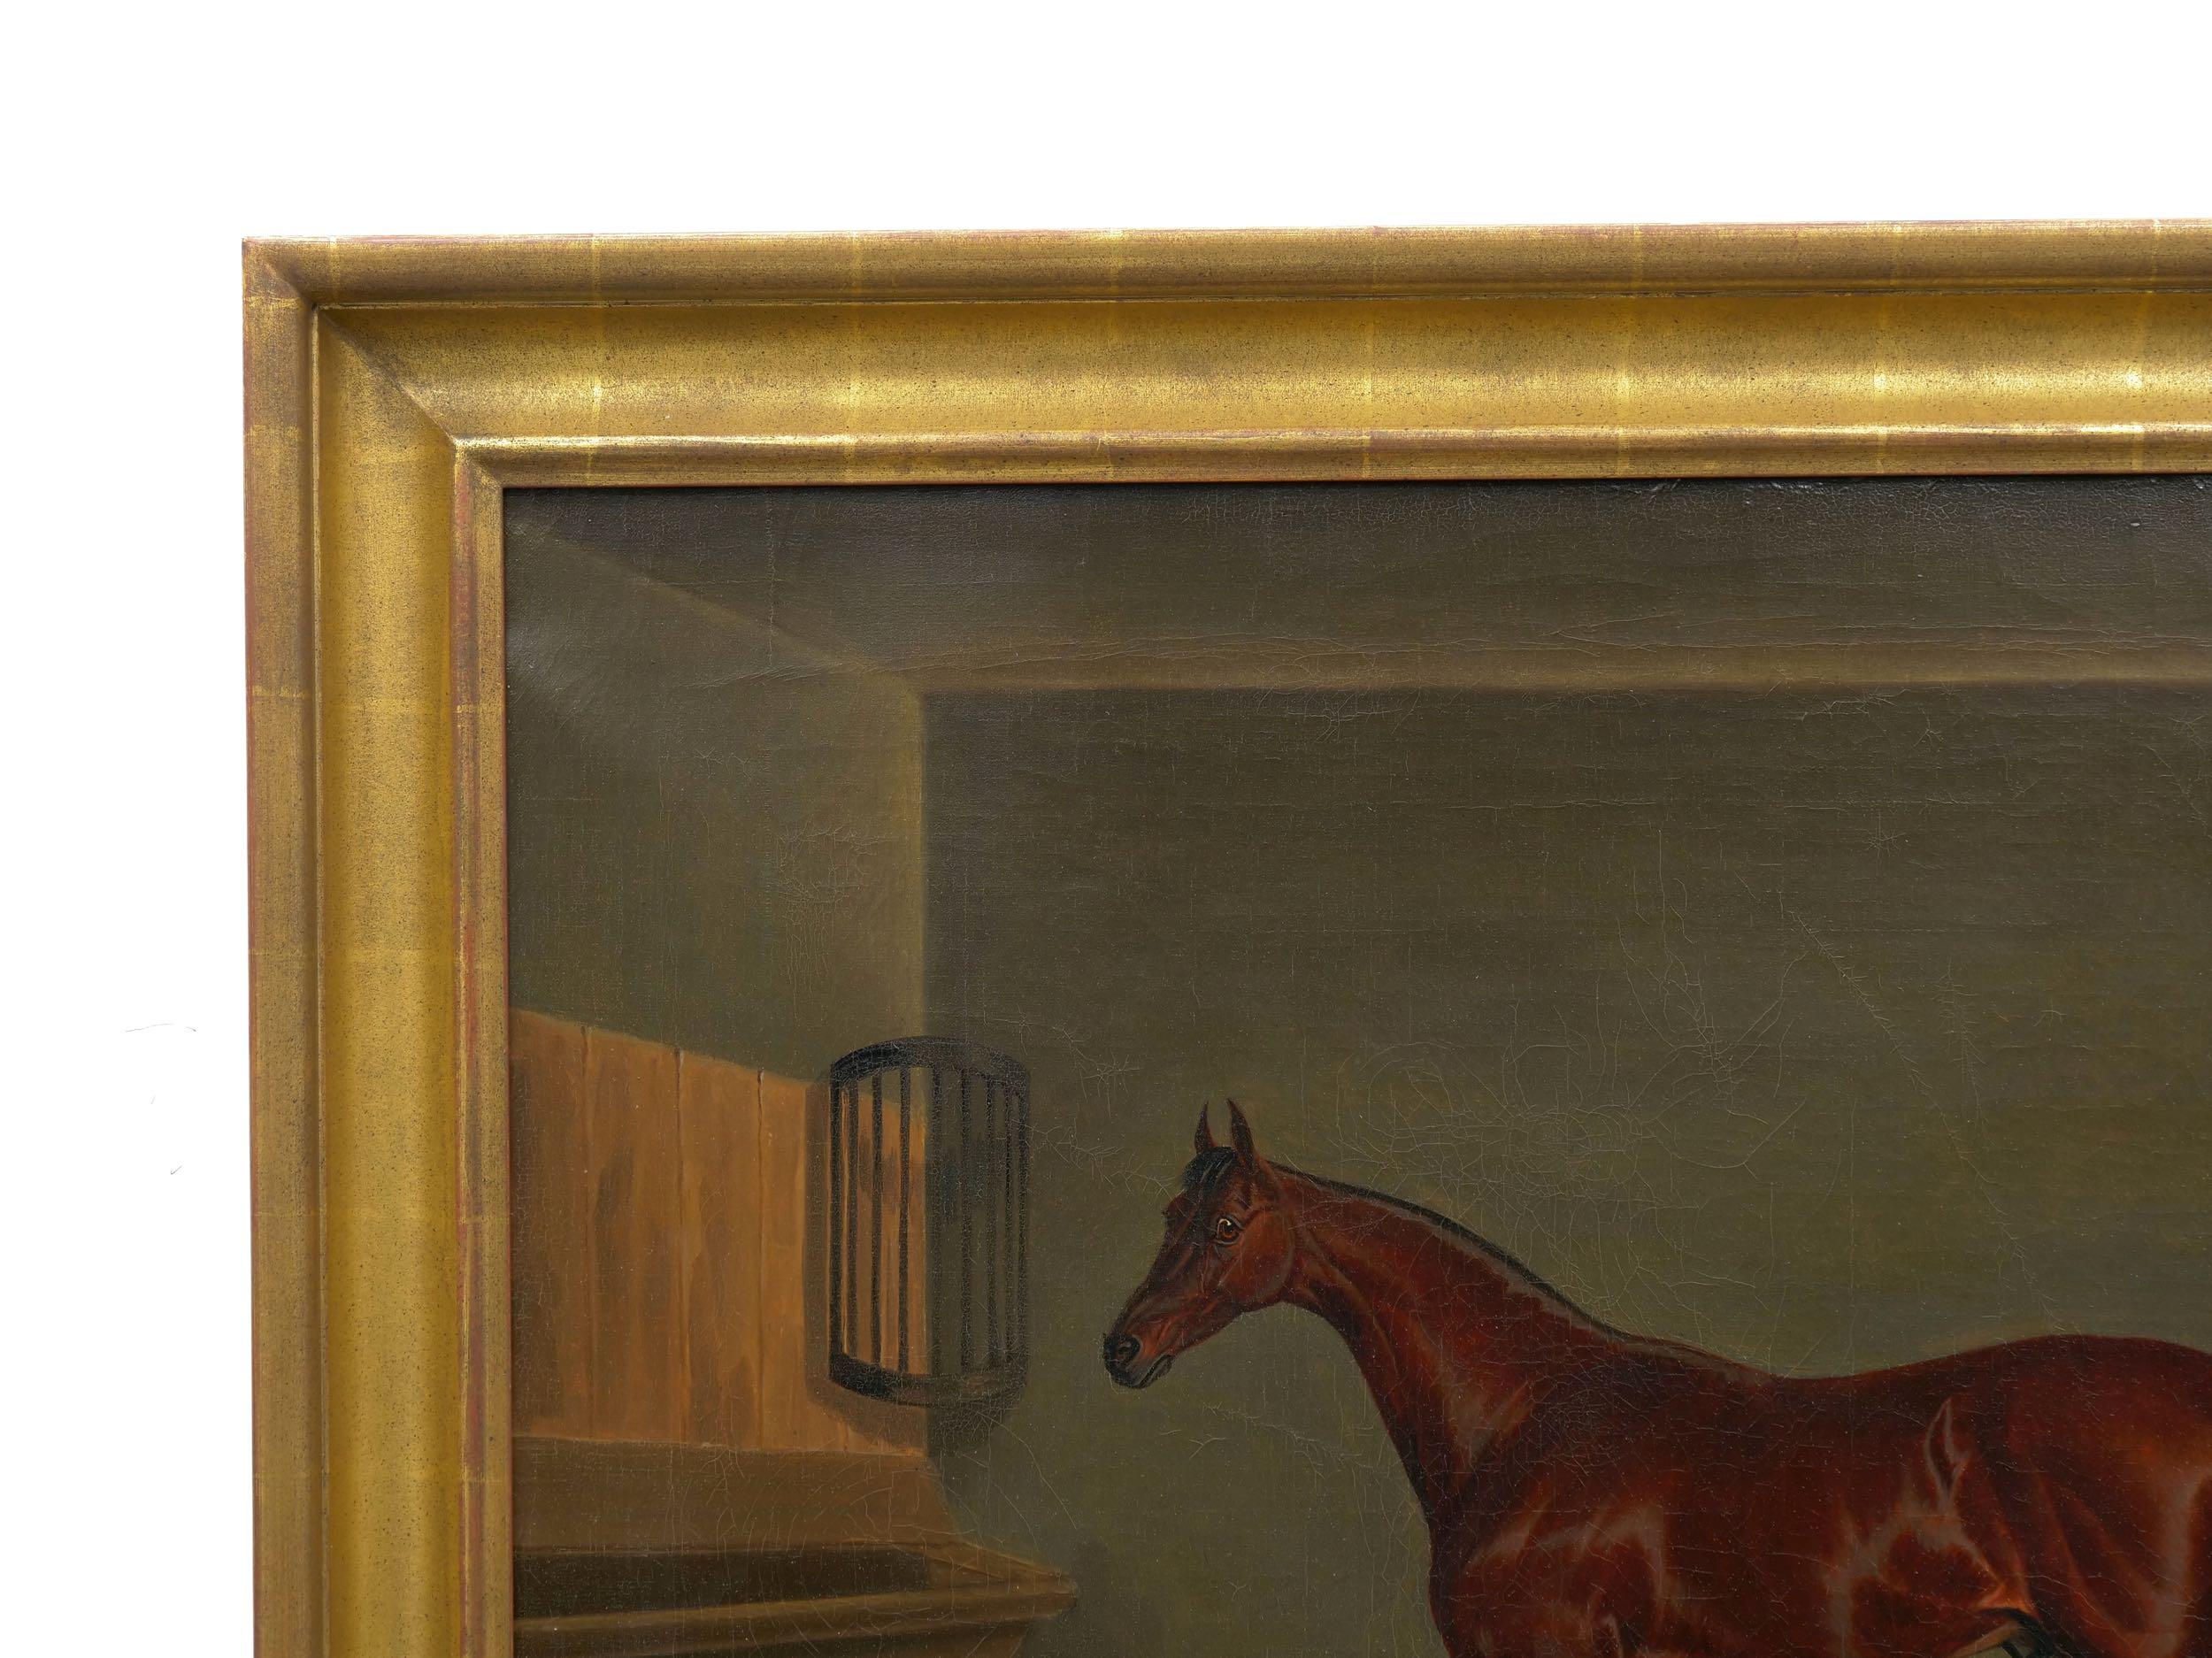 Oiled “A Bay Racehorse in Stable” '1832' Antique English Painting by James Loder